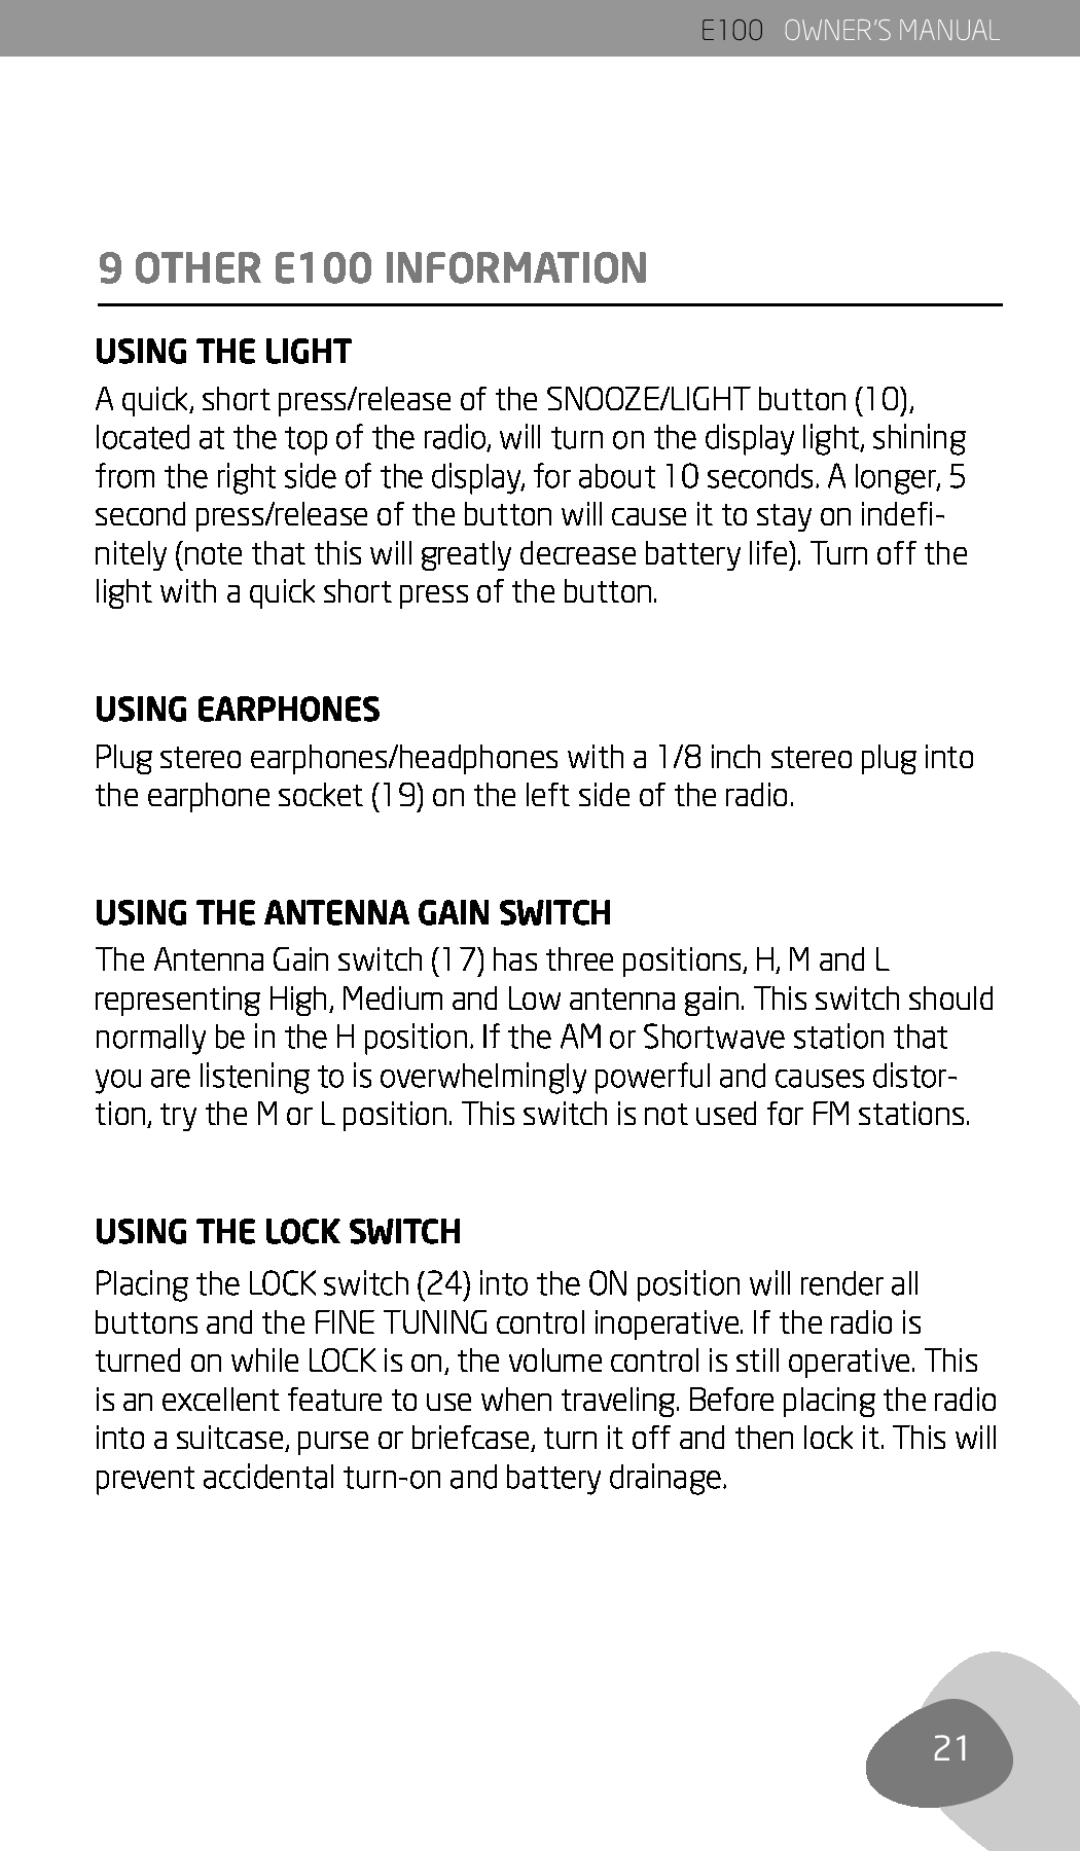 Eton OTHER E100 INFORMATION, Using The Light, Using Earphones, Using The Antenna Gain Switch, Using The Lock Switch 